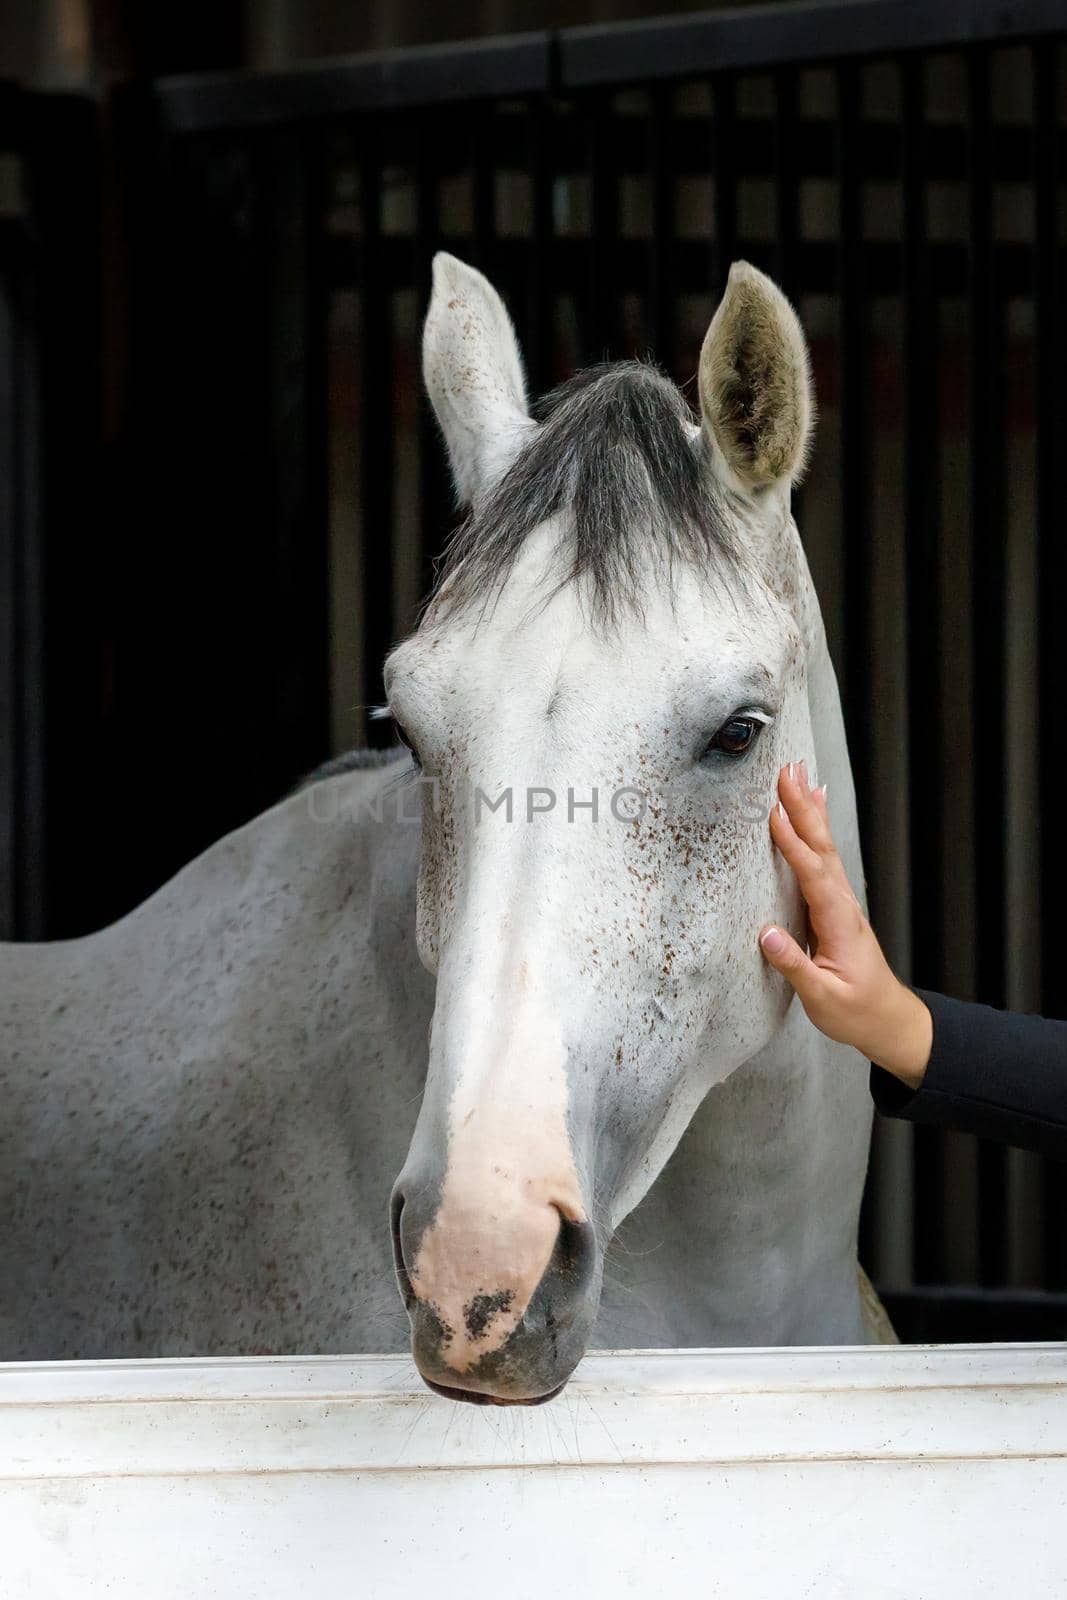 A portrait of a white horse against a dark background of a stable window. The girl's hand touches and caresses the horse's face. Love of horses, beautiful friendship between human and animal.